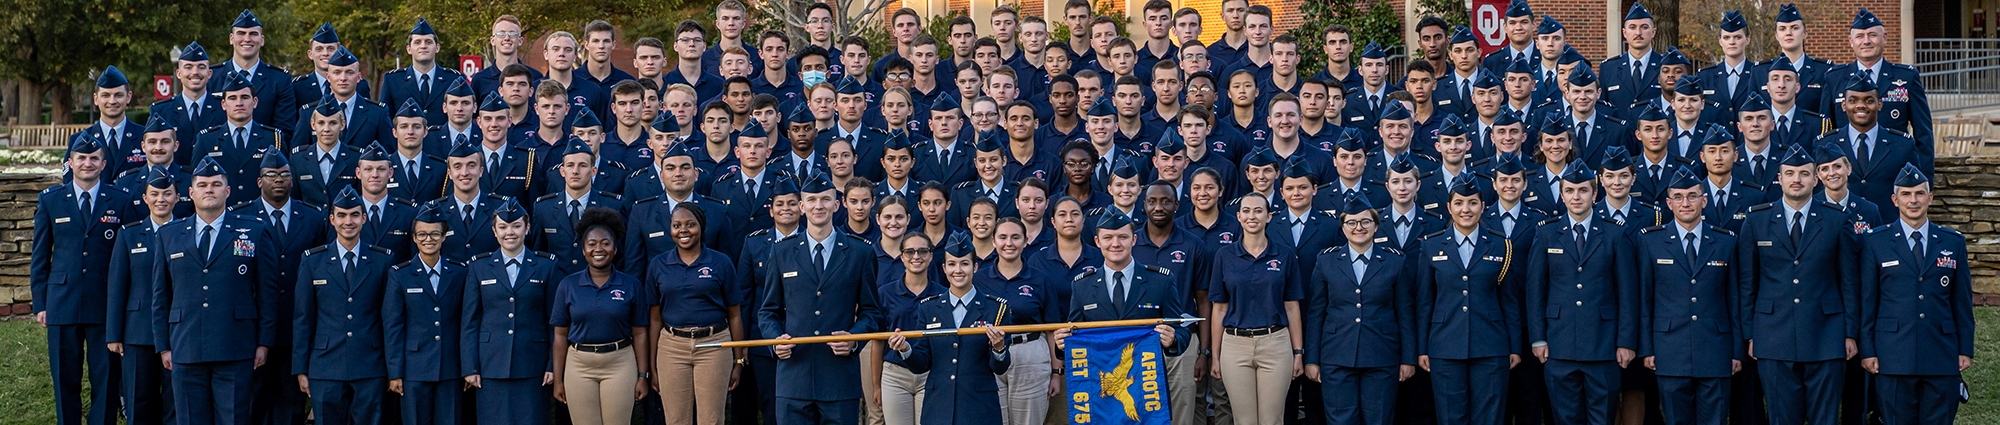 Air Force ROTC group photo